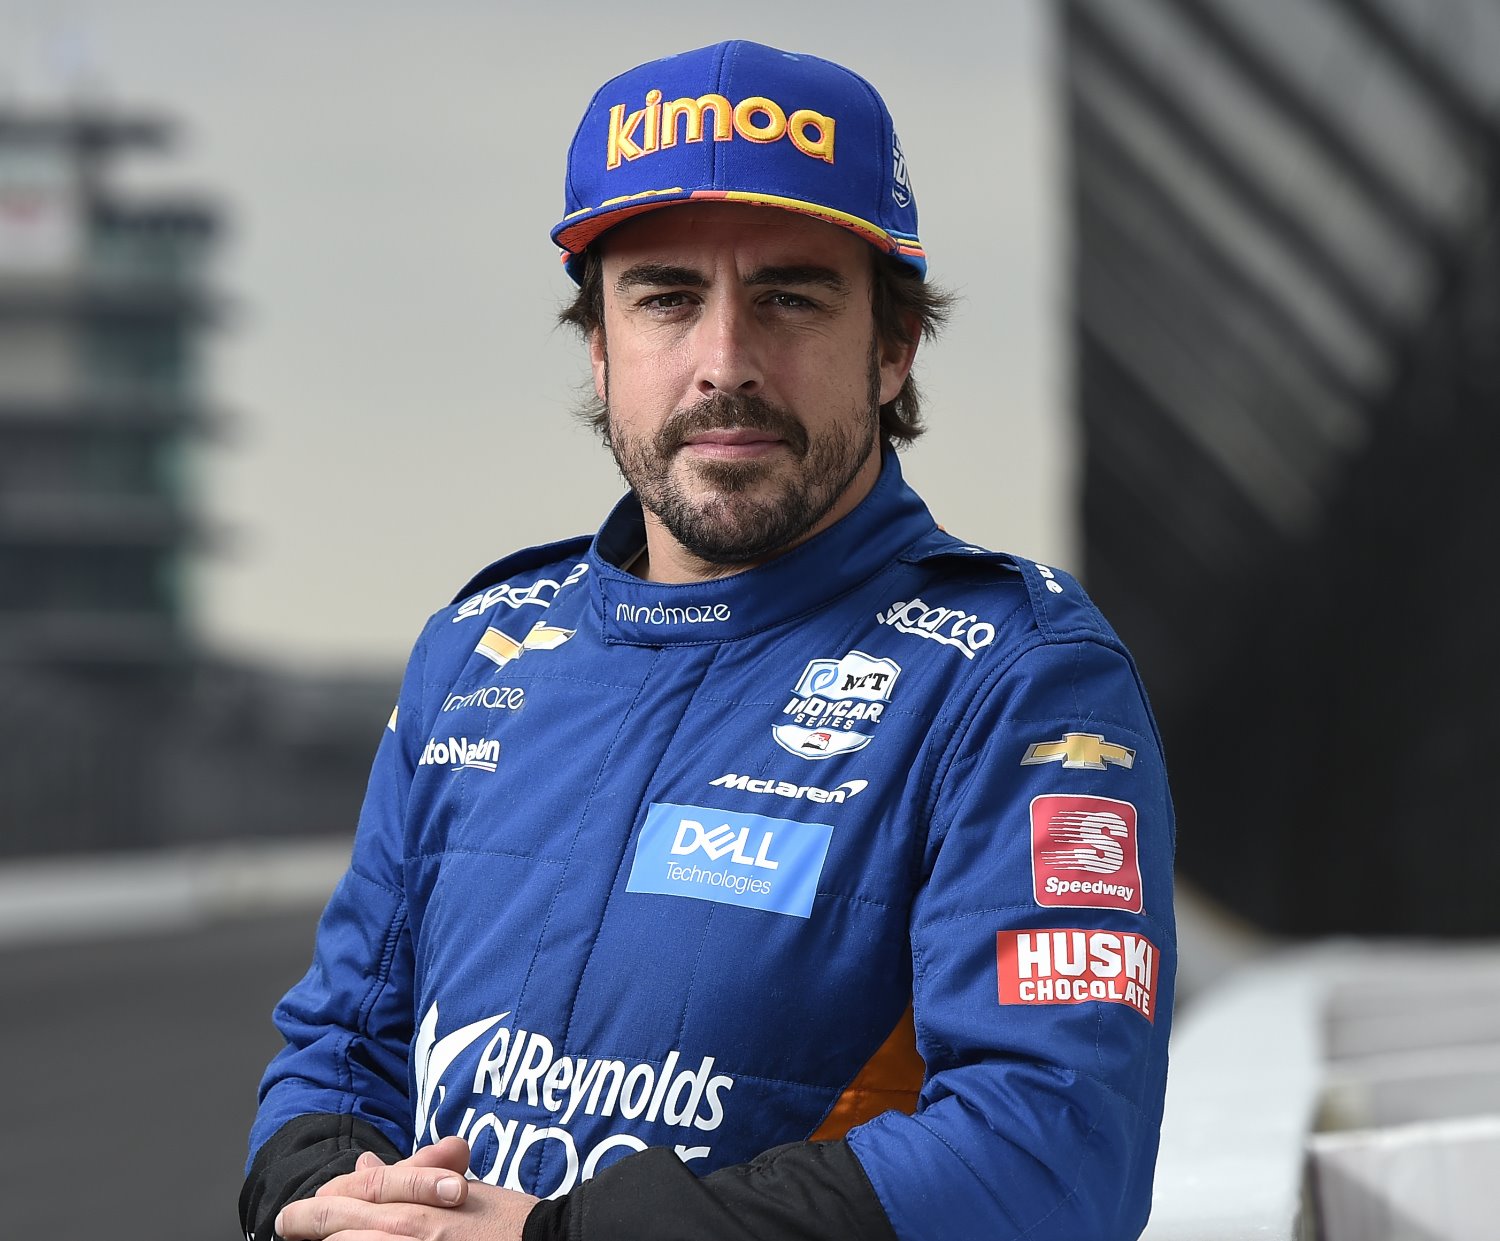 Will Alonso stay home and pull weeds from his garden in 2020, or drive IndyCars?